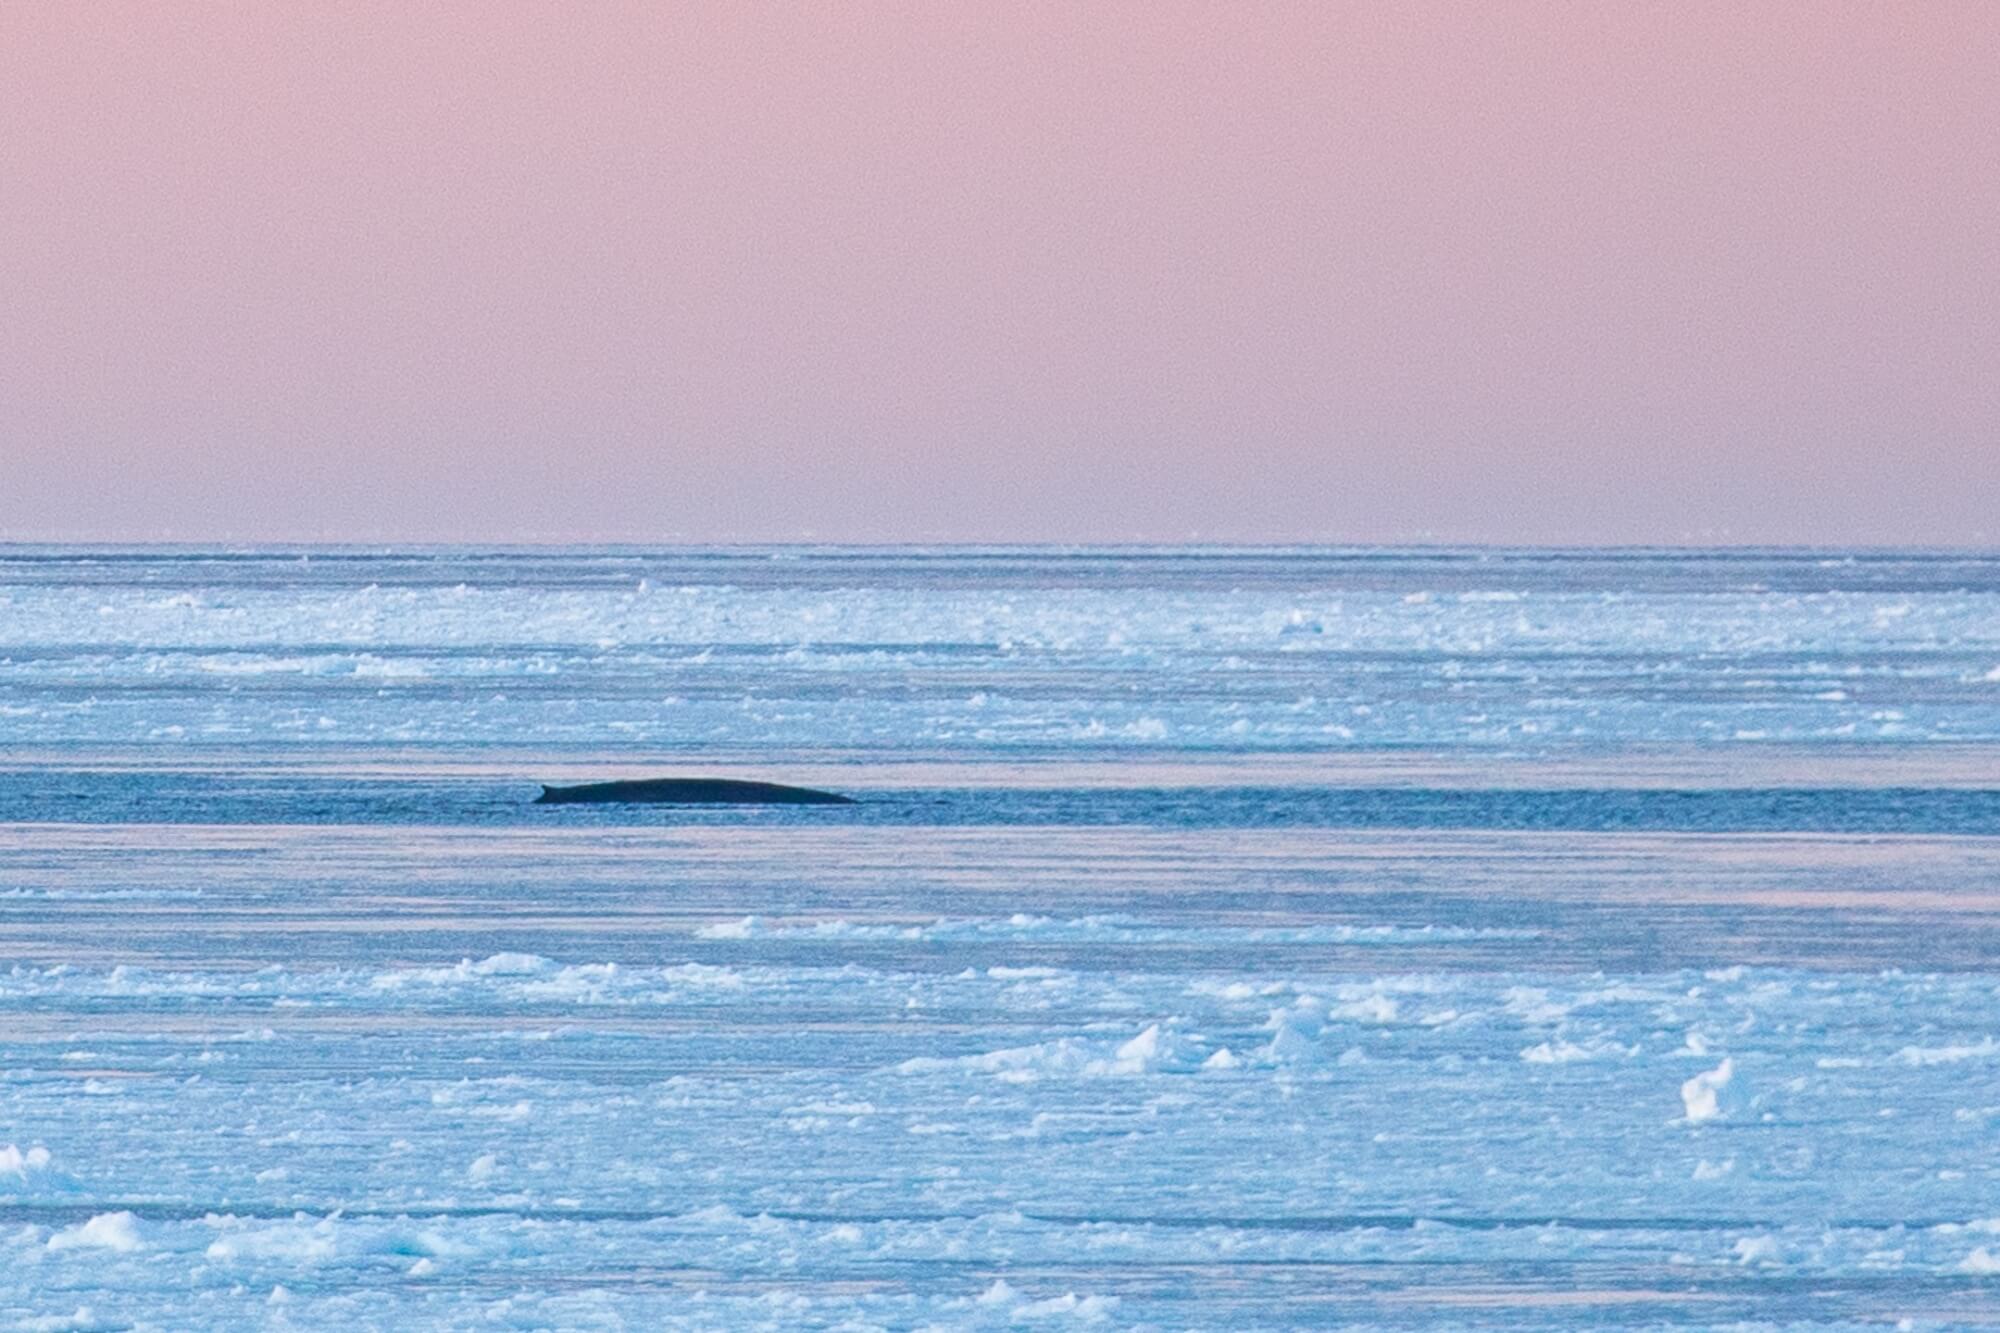 blue whale back in the ice